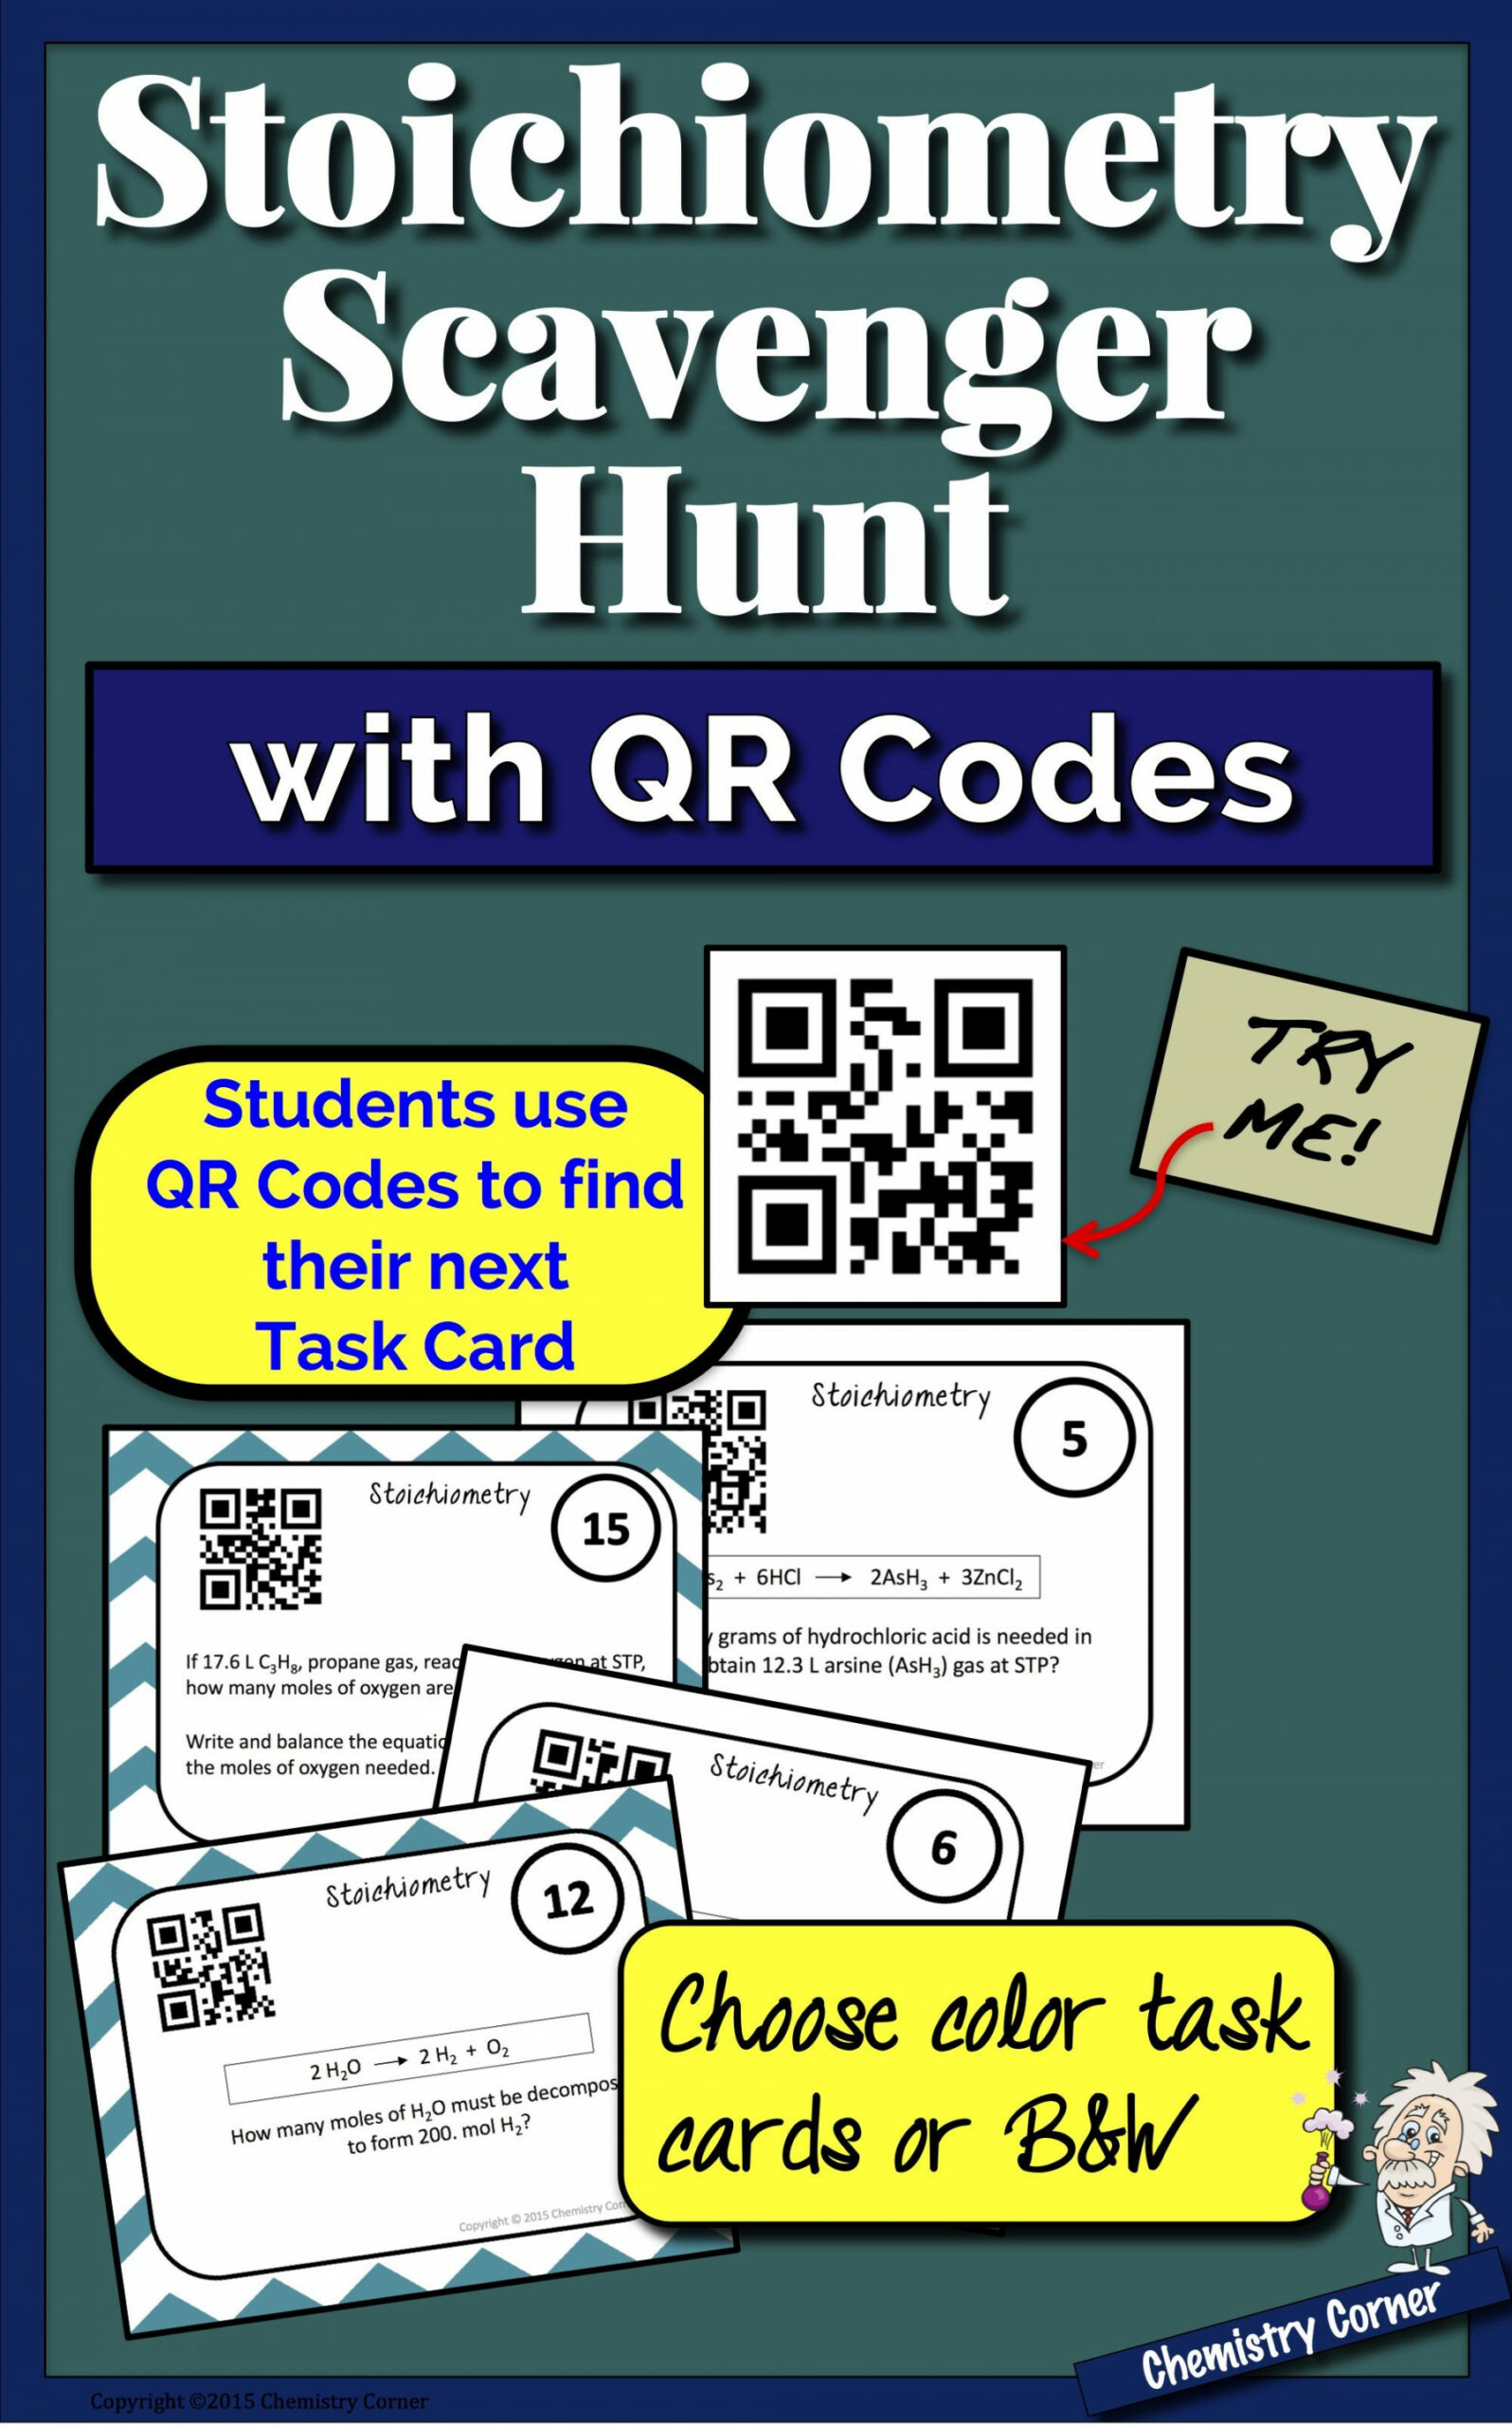 Stoichiometry Scavenger Hunt with QR Codes  Chemistry education